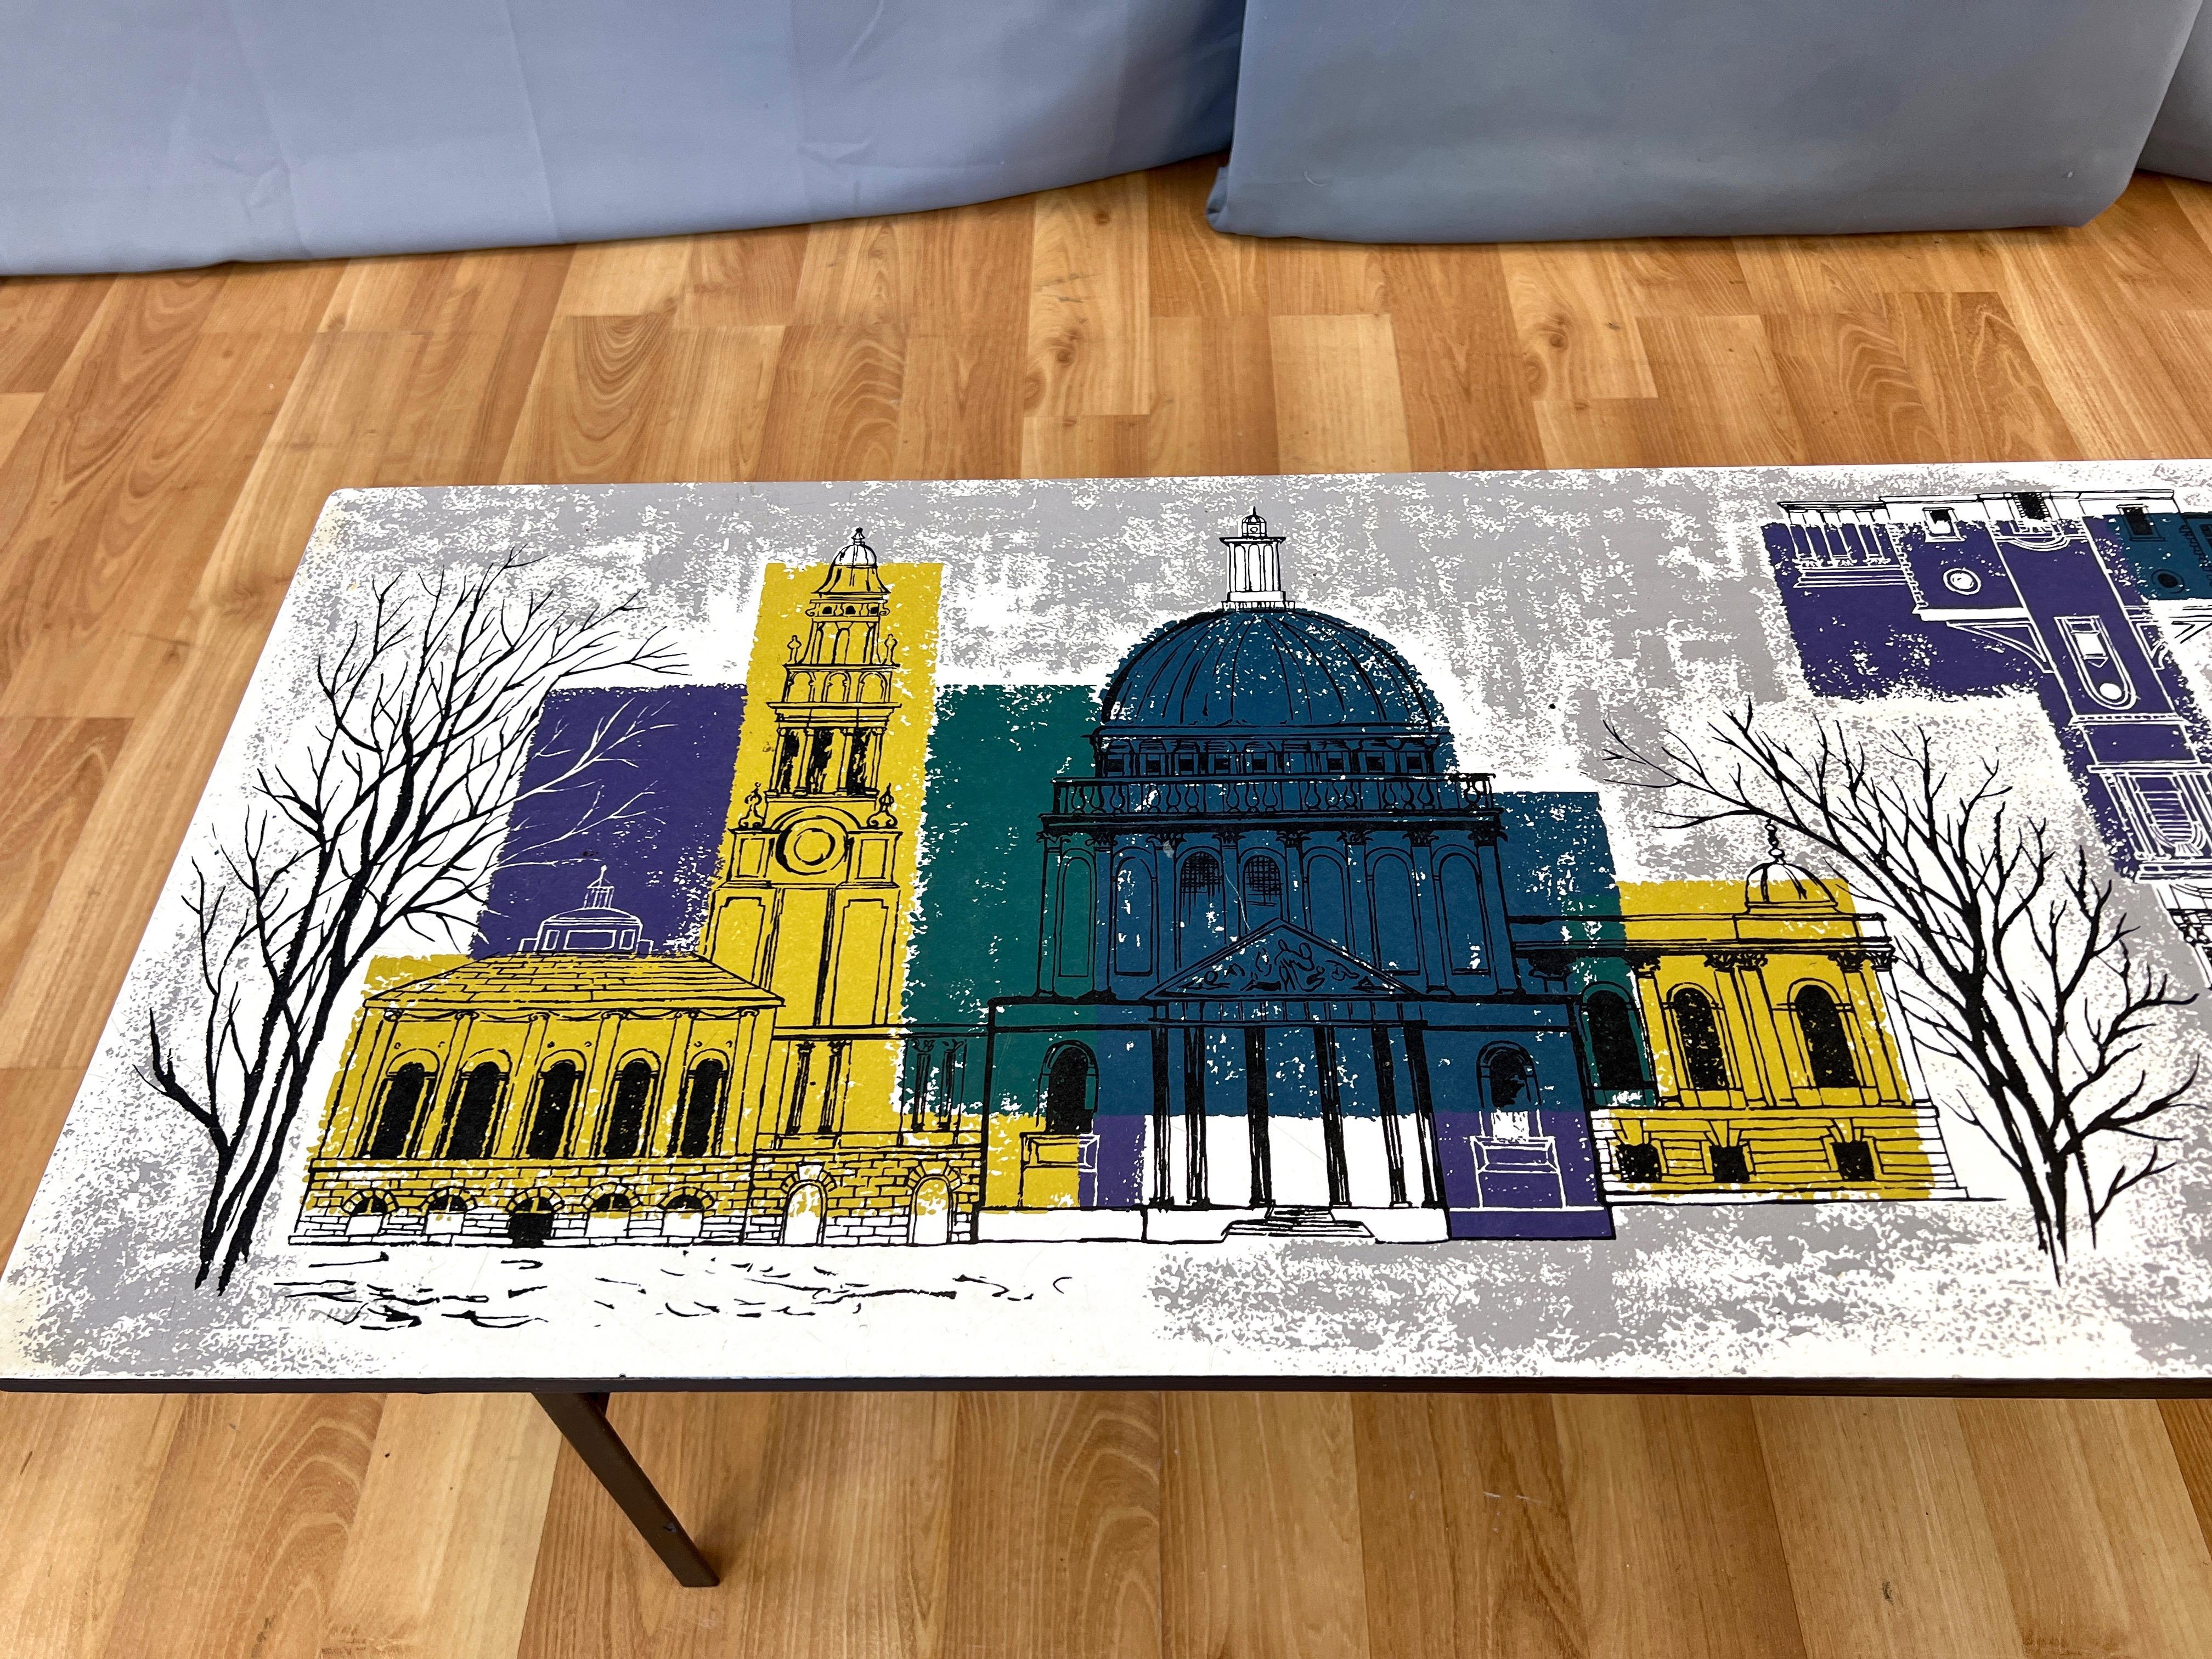 Mid-20th Century John Piper London Skyline Coffee Table by Myer for Conran and Heal’s, c. 1960 For Sale